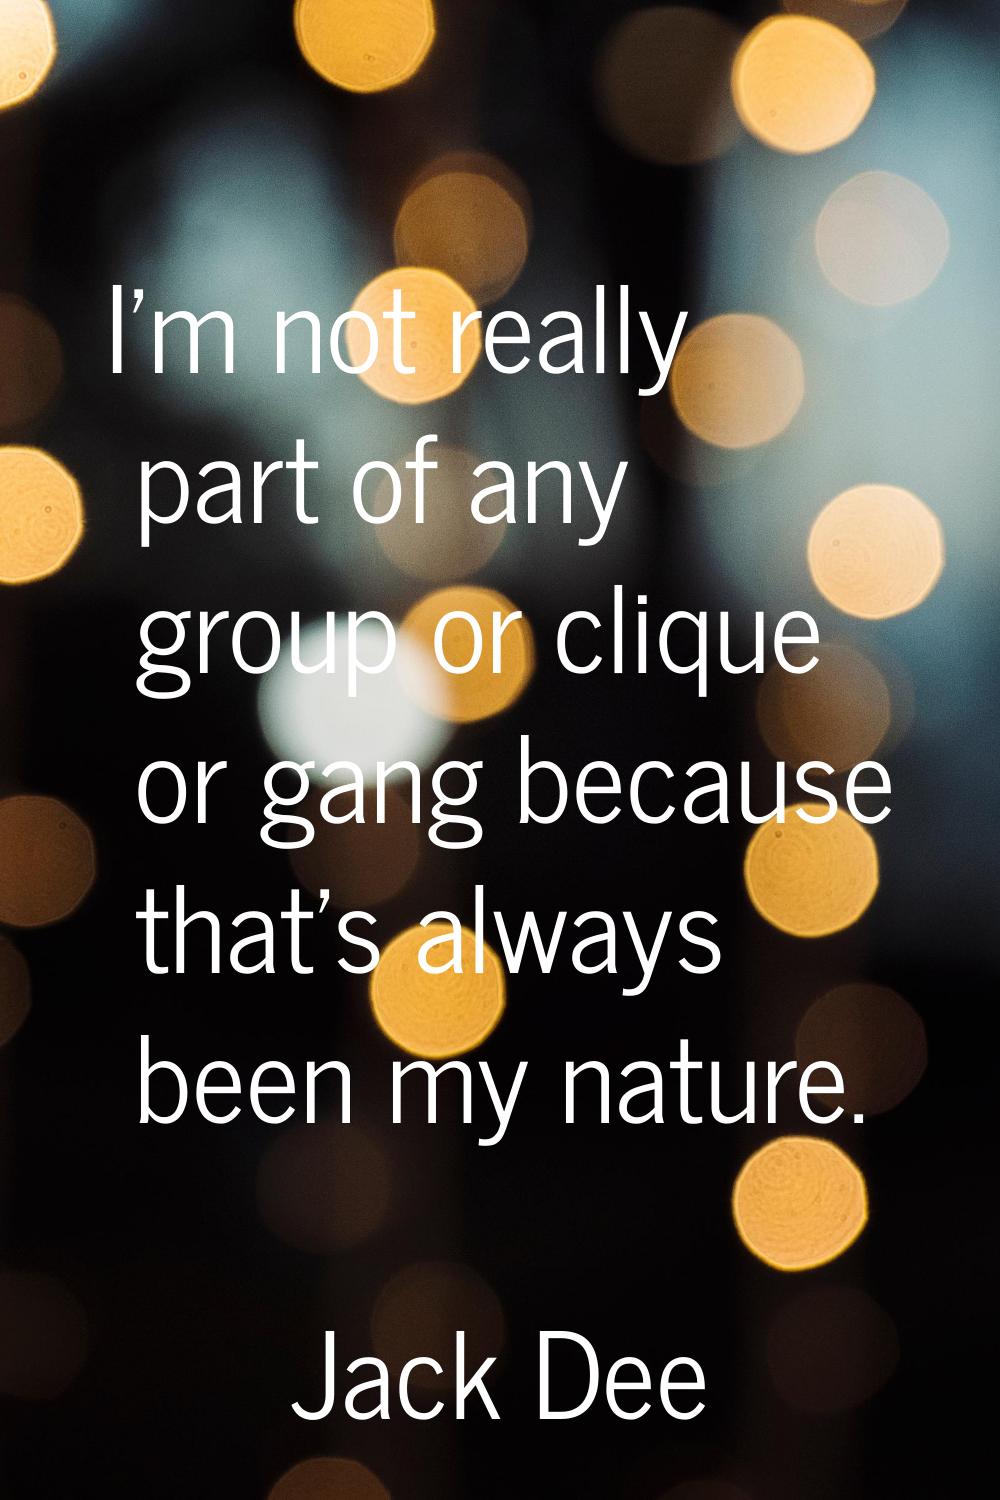 I'm not really part of any group or clique or gang because that's always been my nature.